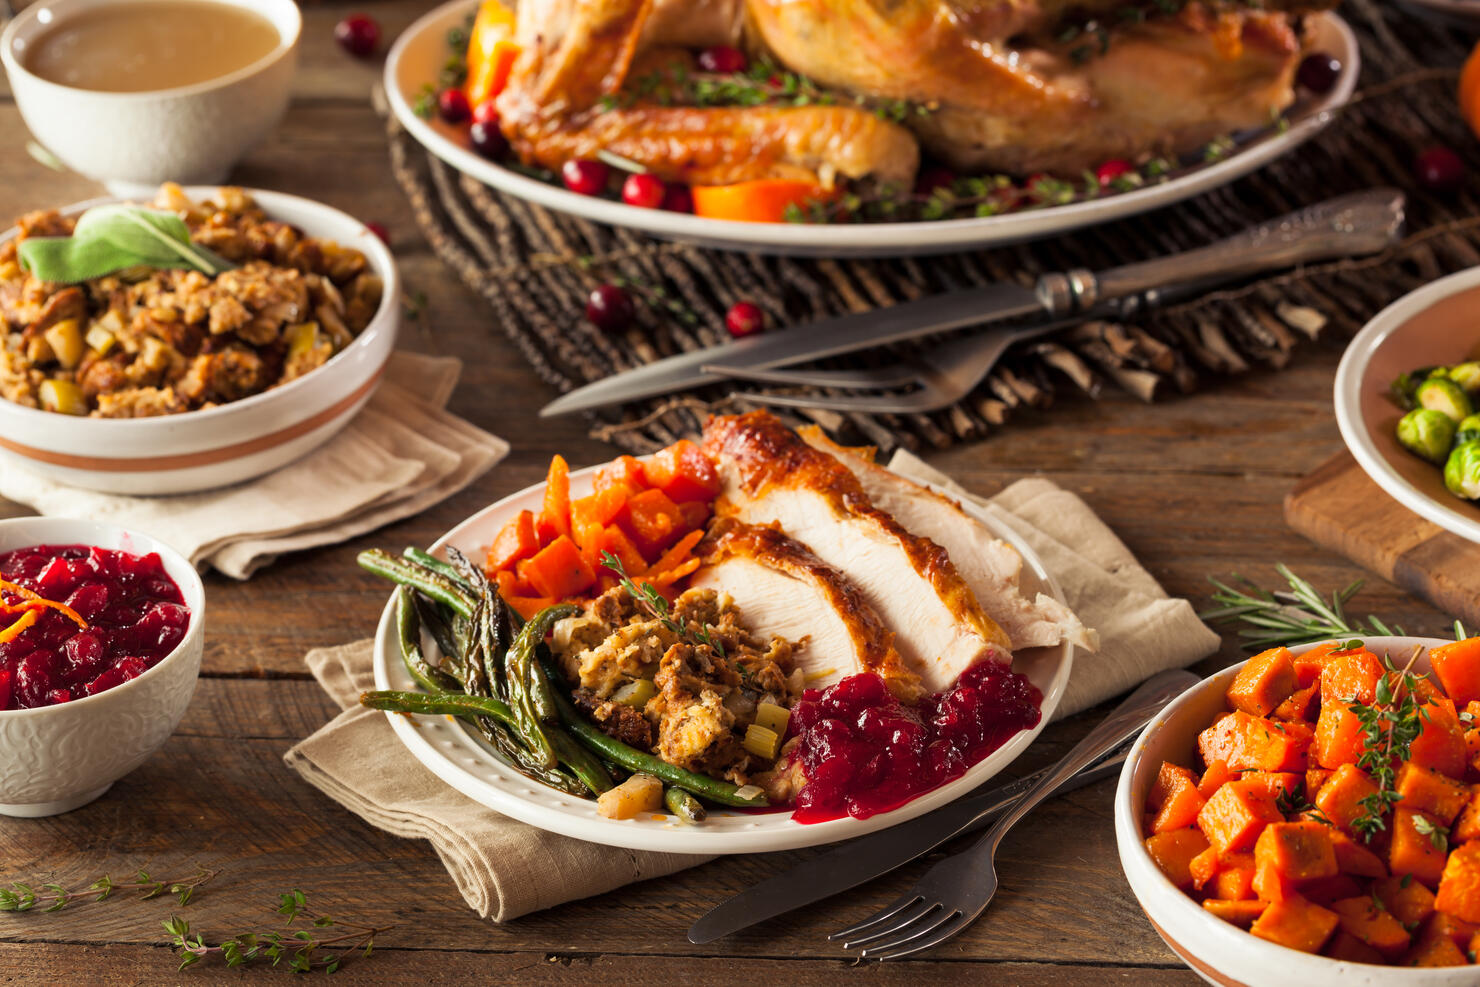 Our Most Clicked Thanksgiving Recipe Last Year